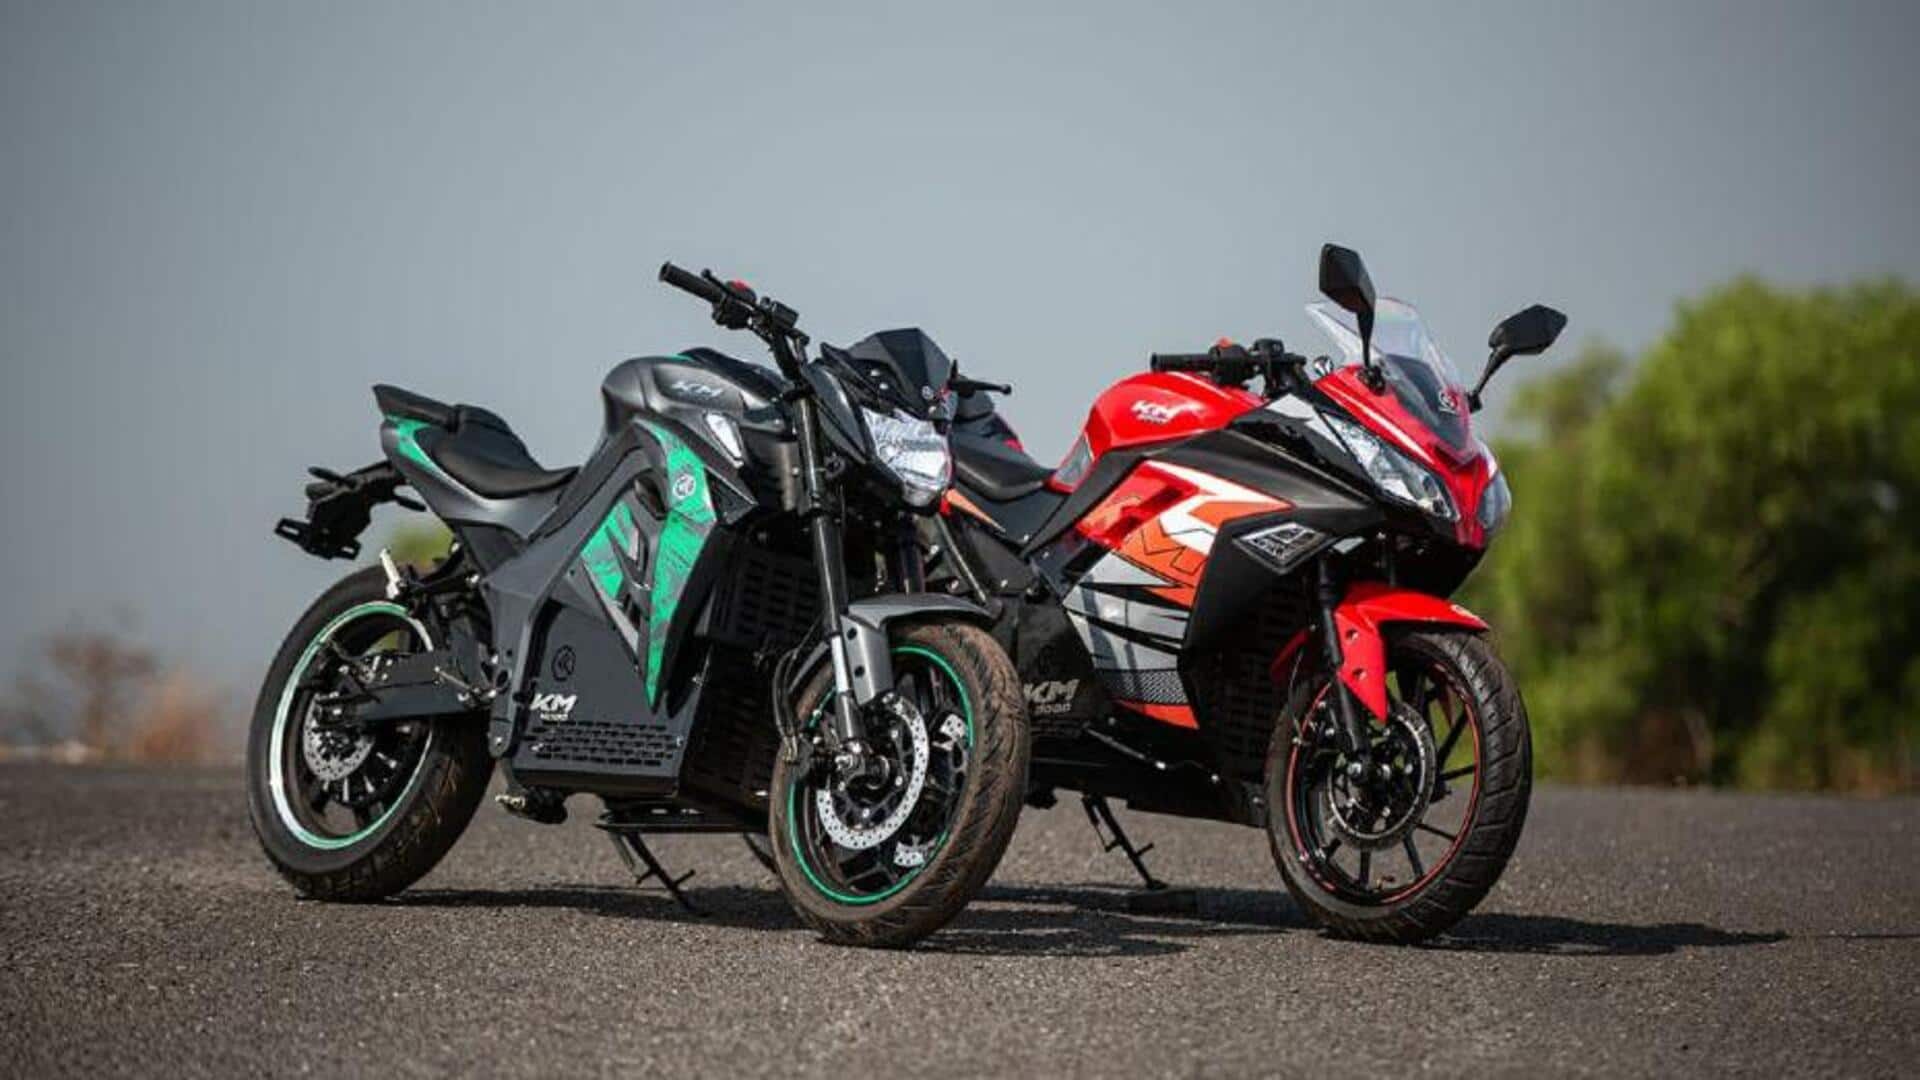 Kabira Mobility launches electric motorcycles with Foxconn-made powertrain in India